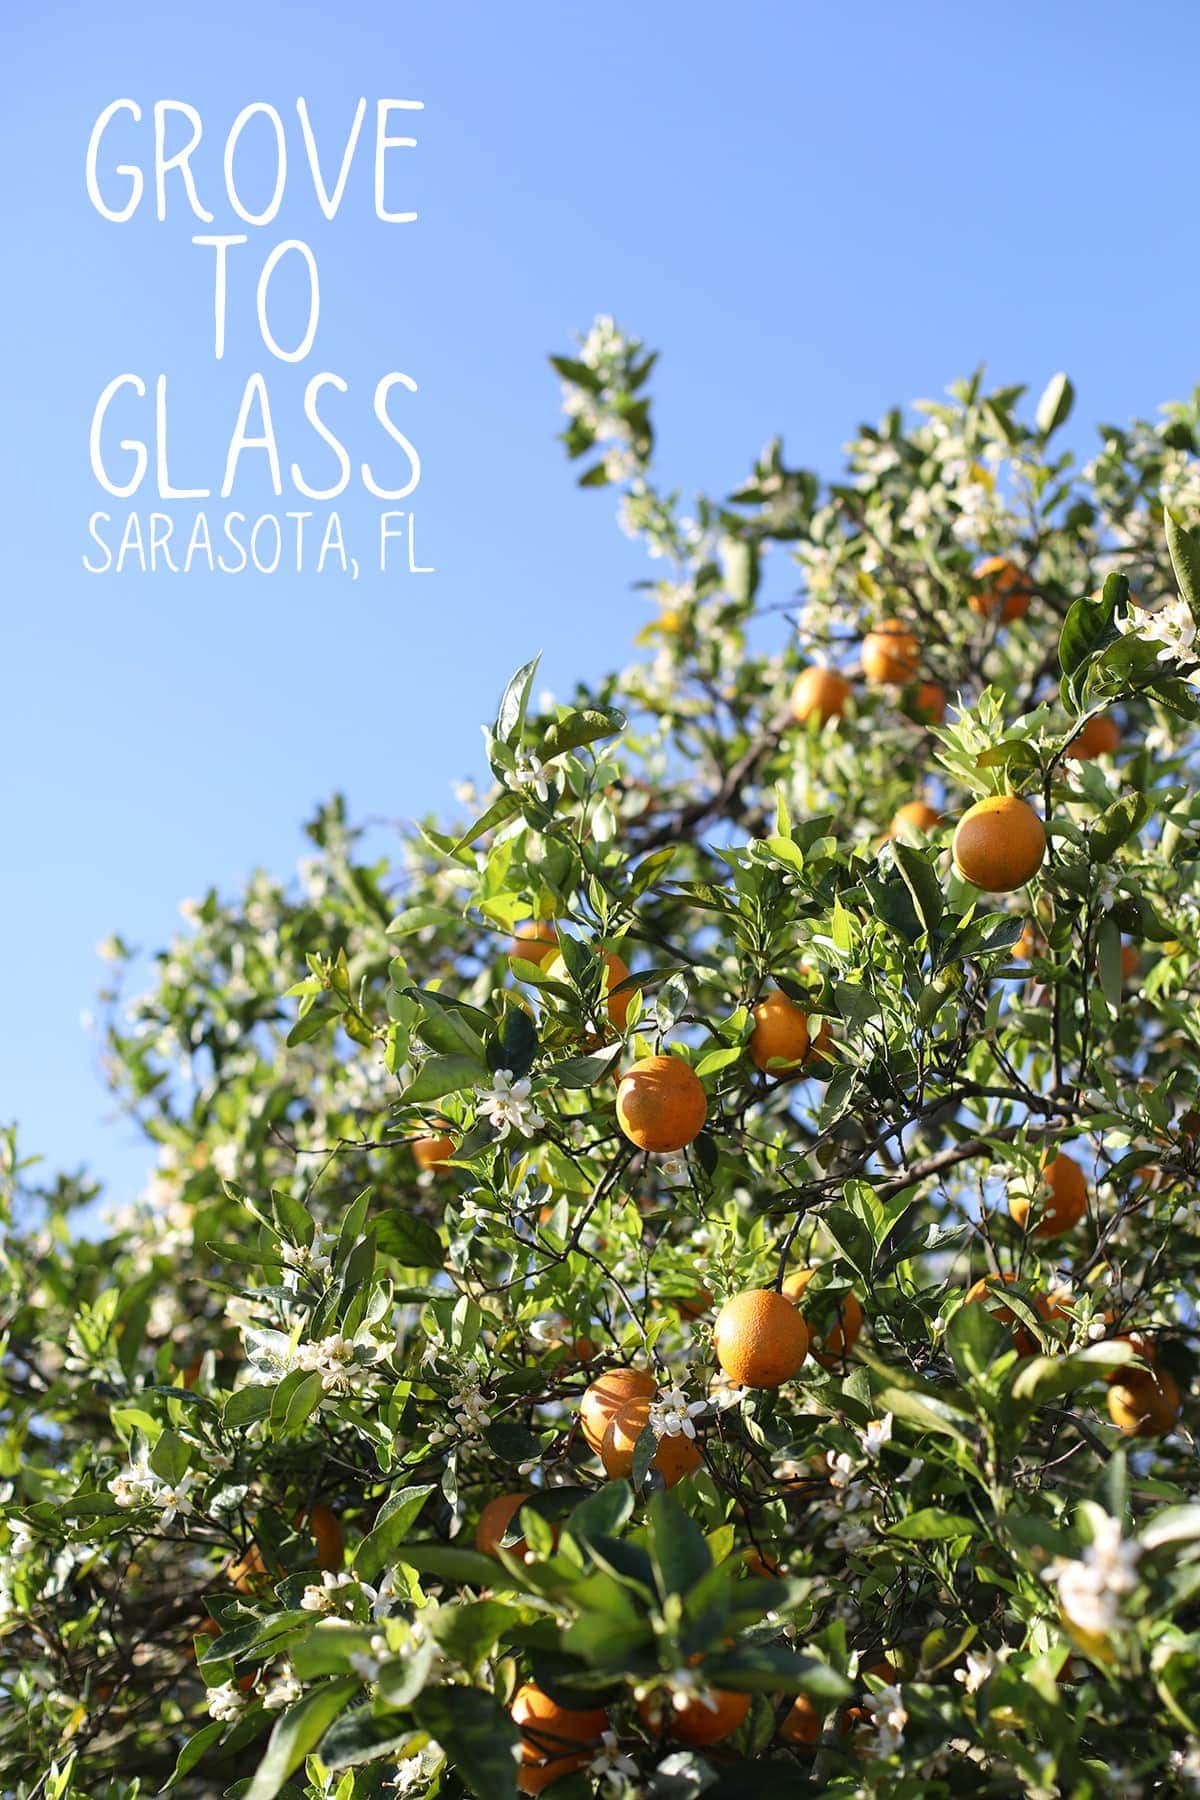 From the grove to glass -- recapping my tour with Tropicana on how oranges go from a whole fruit to juice! 